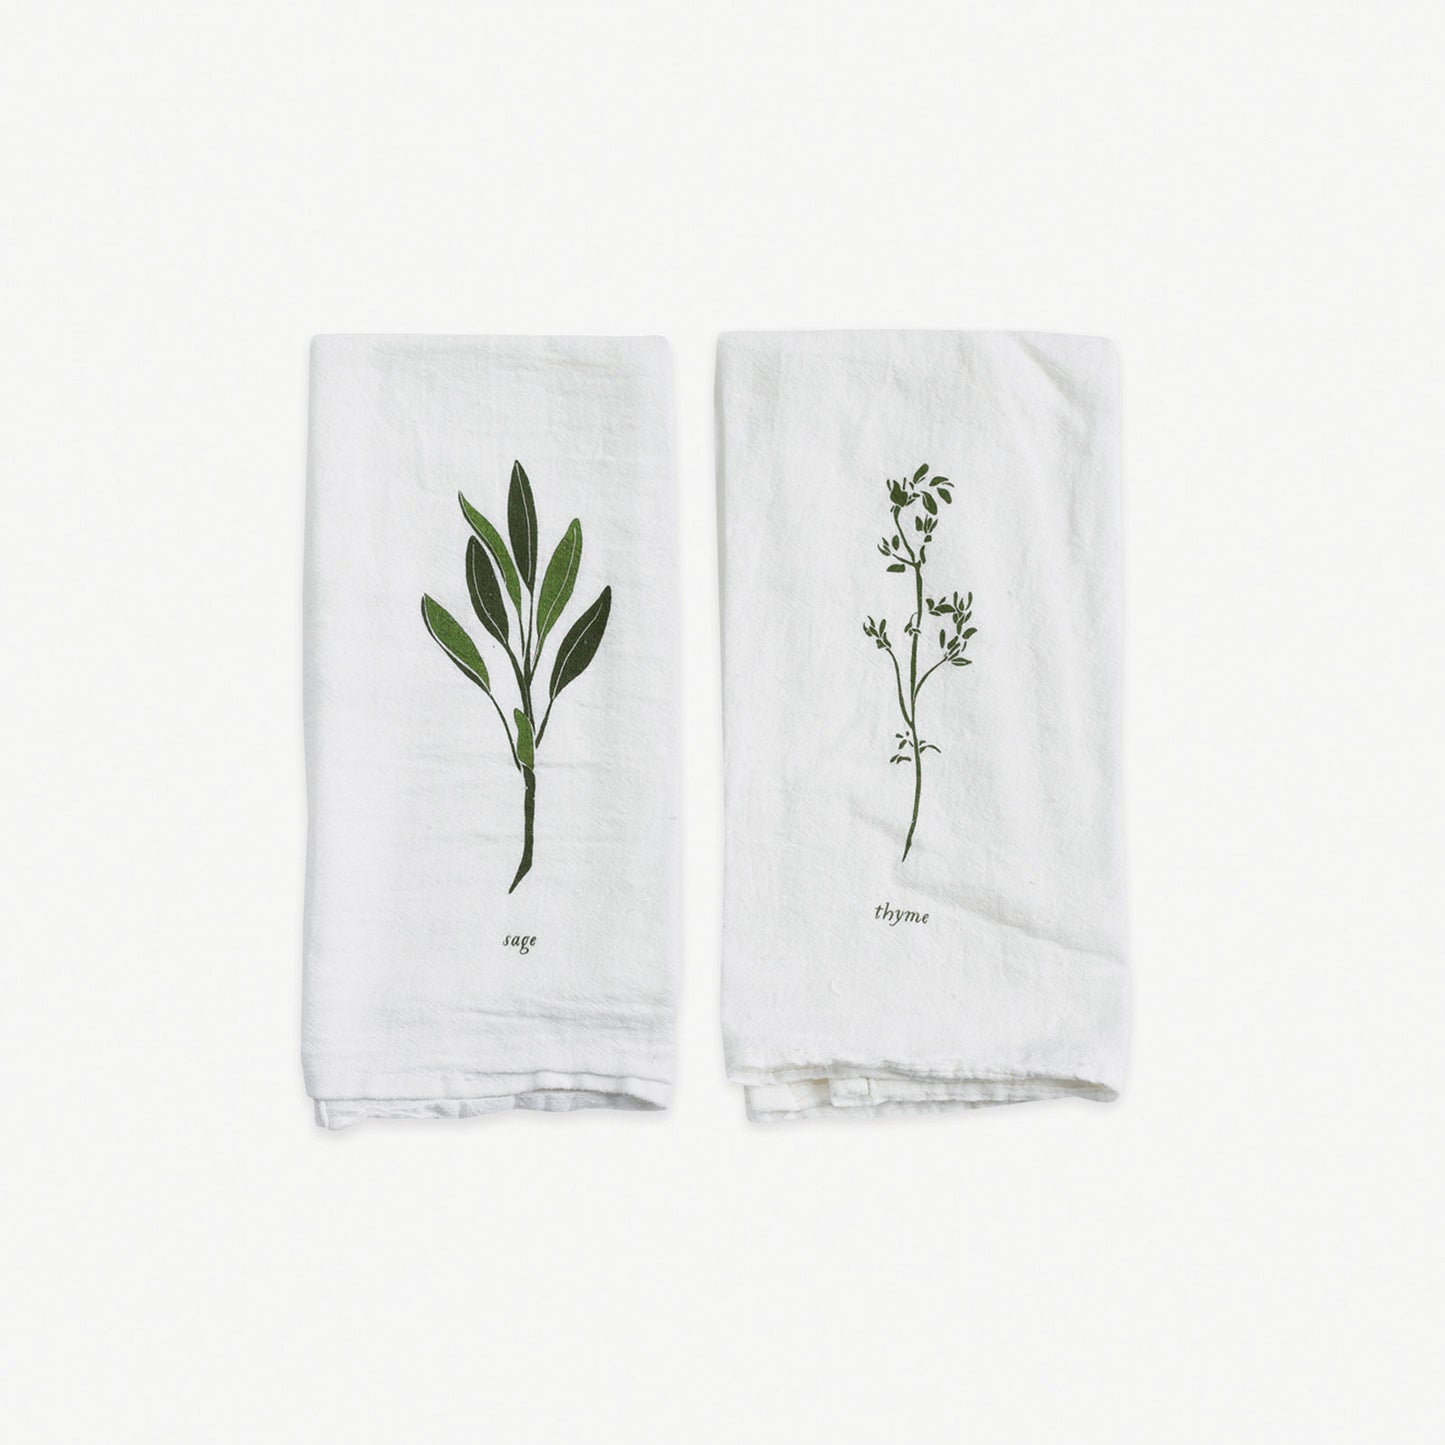 Cloth dinner napkins made with eco-friendly flour sack in the USA, featuring botanical Sage & Thyme artwork by June & December artist Katie Forte